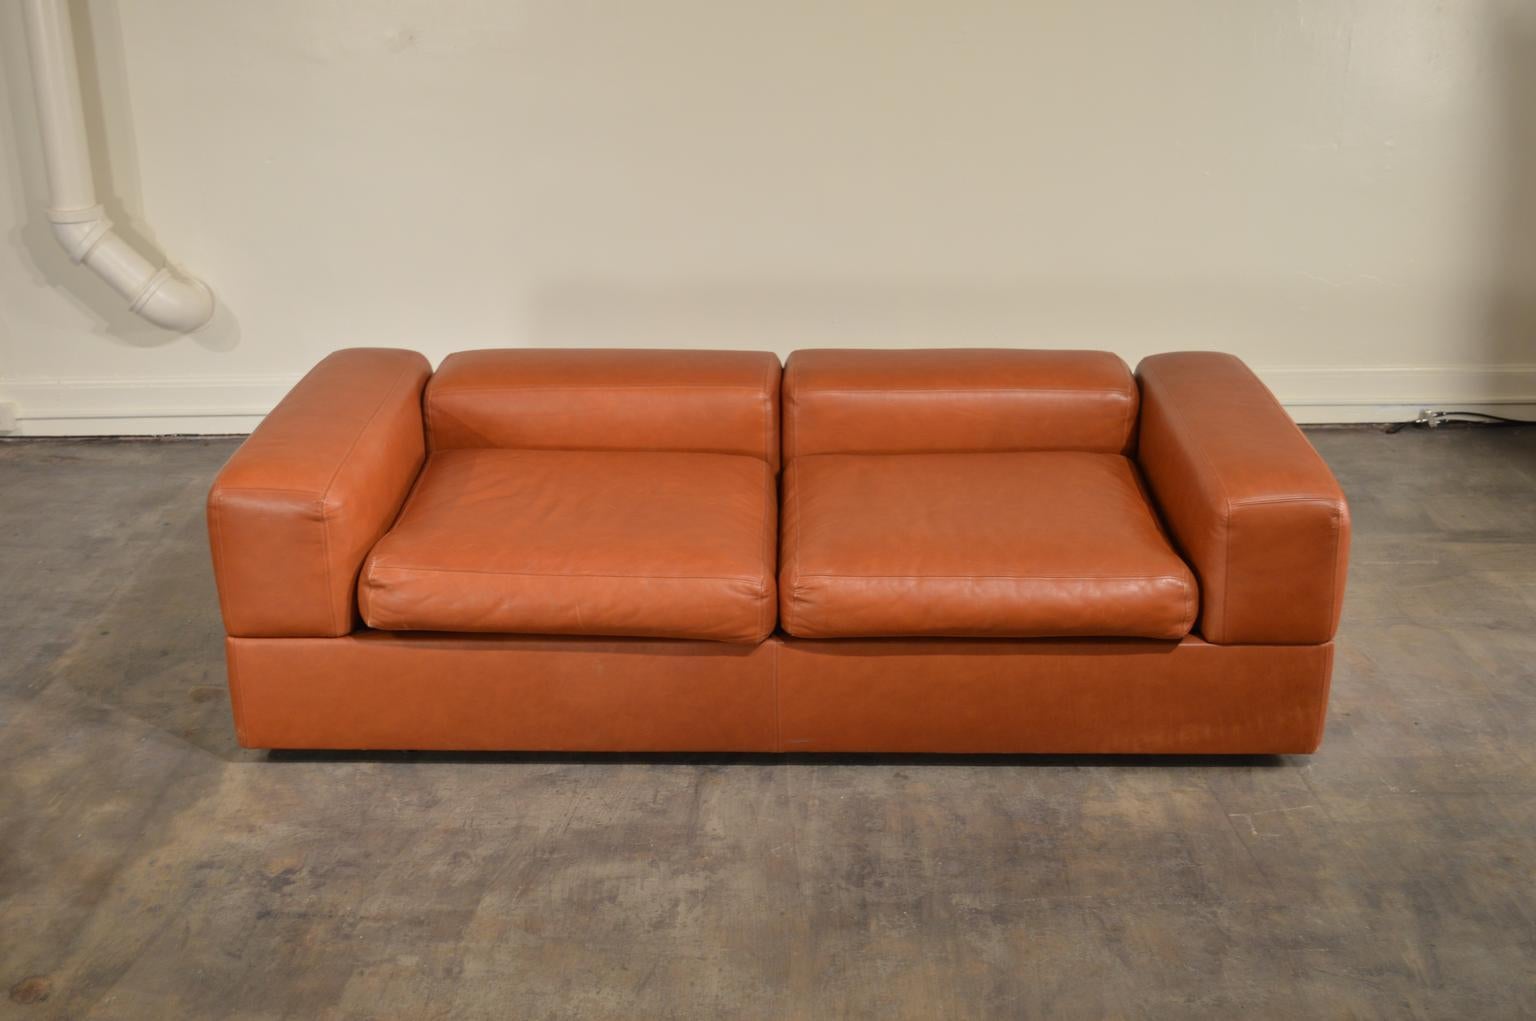 Cognac leather sofa daybed designed by Tito Agnoli for Cinova of Italy. Levered arms and back conceal laminate shelves on the underside that can be used as shelves. The seat cushions rest on a springed mattress underneath. Mattress can be removed